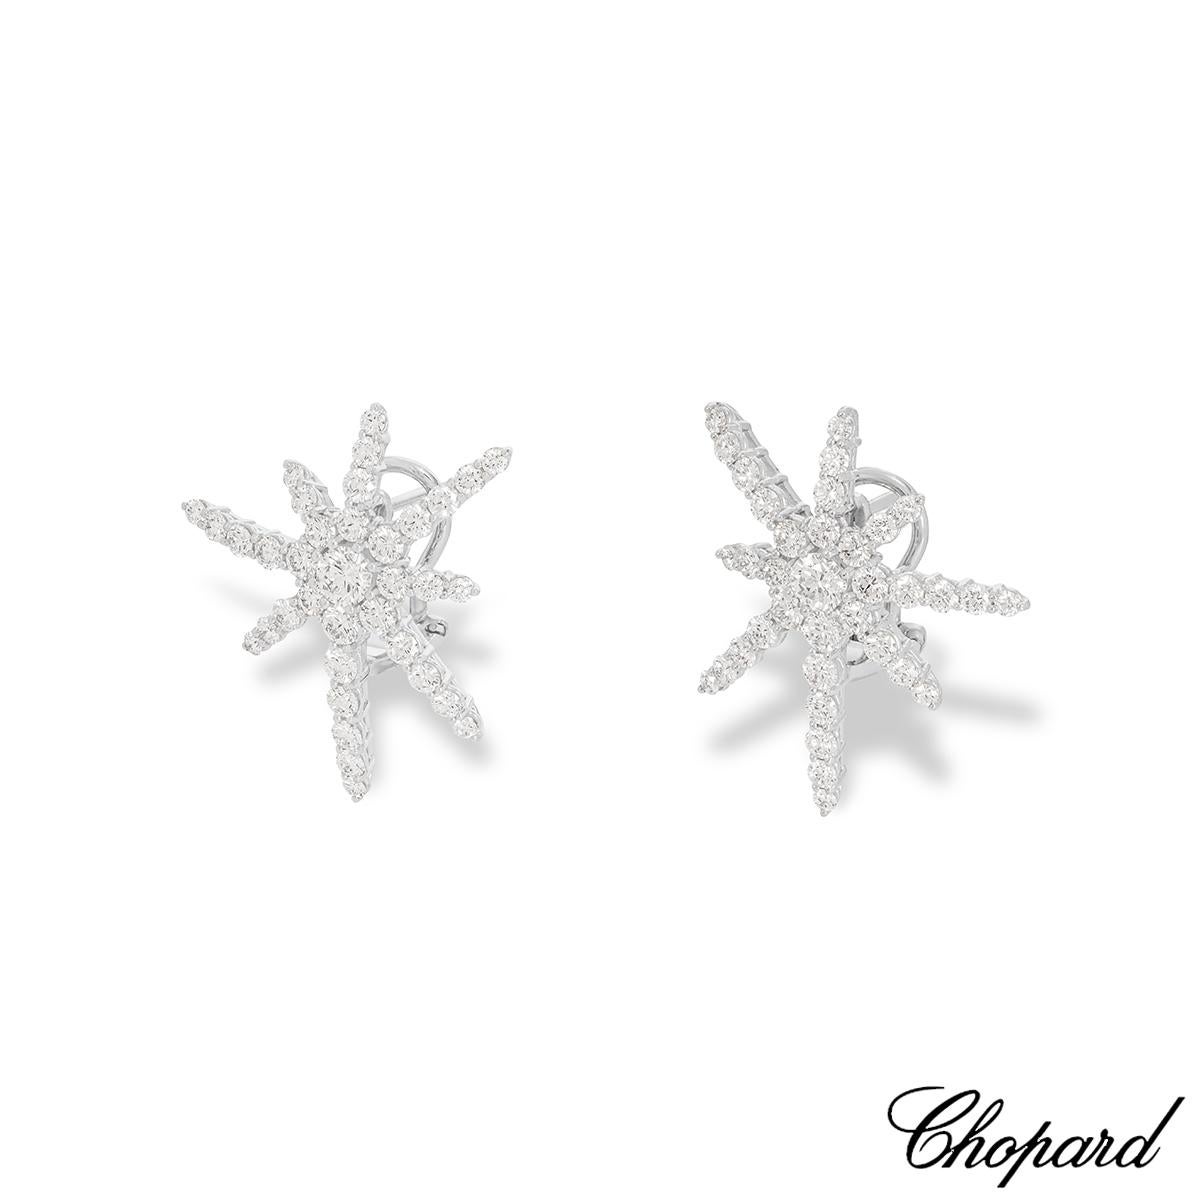 A spectacular pair of 18k white gold diamond earrings by Chopard. The earrings feature a starburst design set with 72 round brilliant cut diamonds weighing 3.22ct, E-F colour and VVS-VS clarity. They measure 28mm in length and 24mm in width, finish